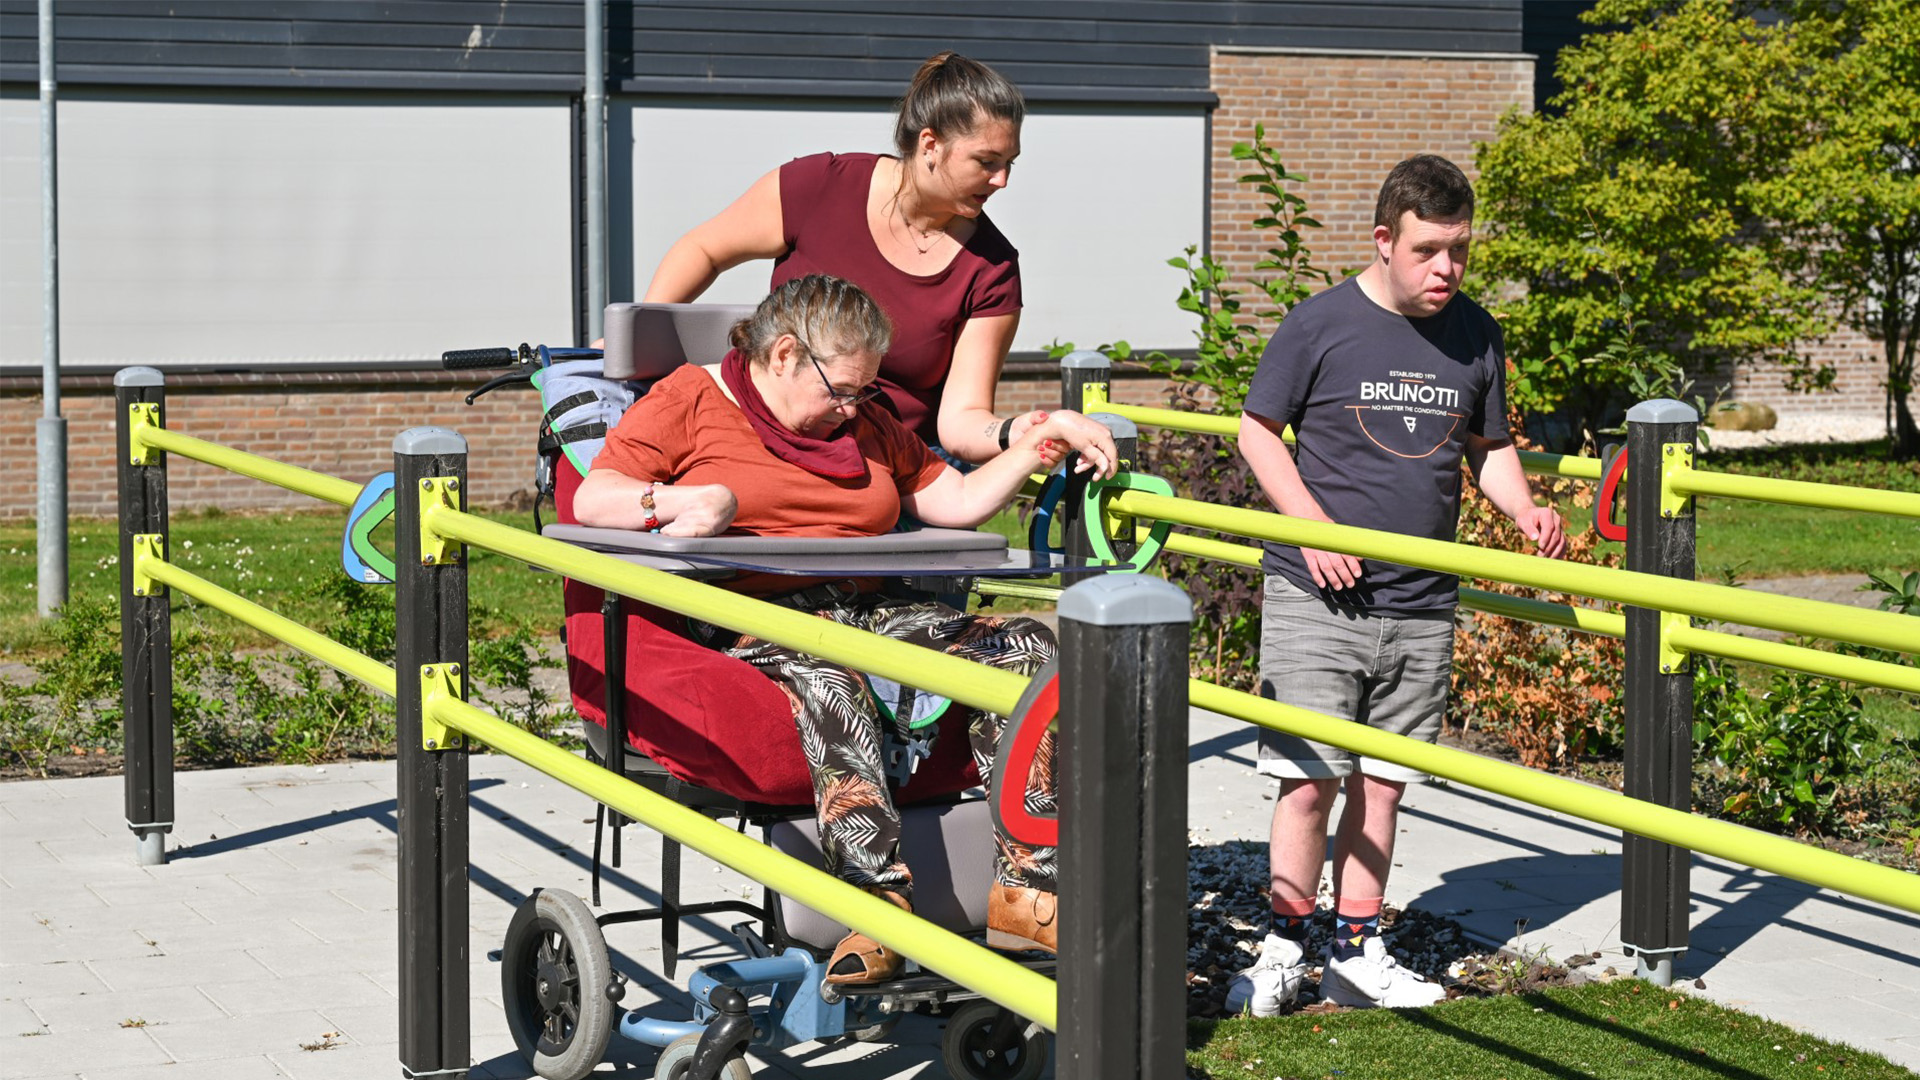 Residents and caregiver from Ipse de Bruggen using the balance pathway